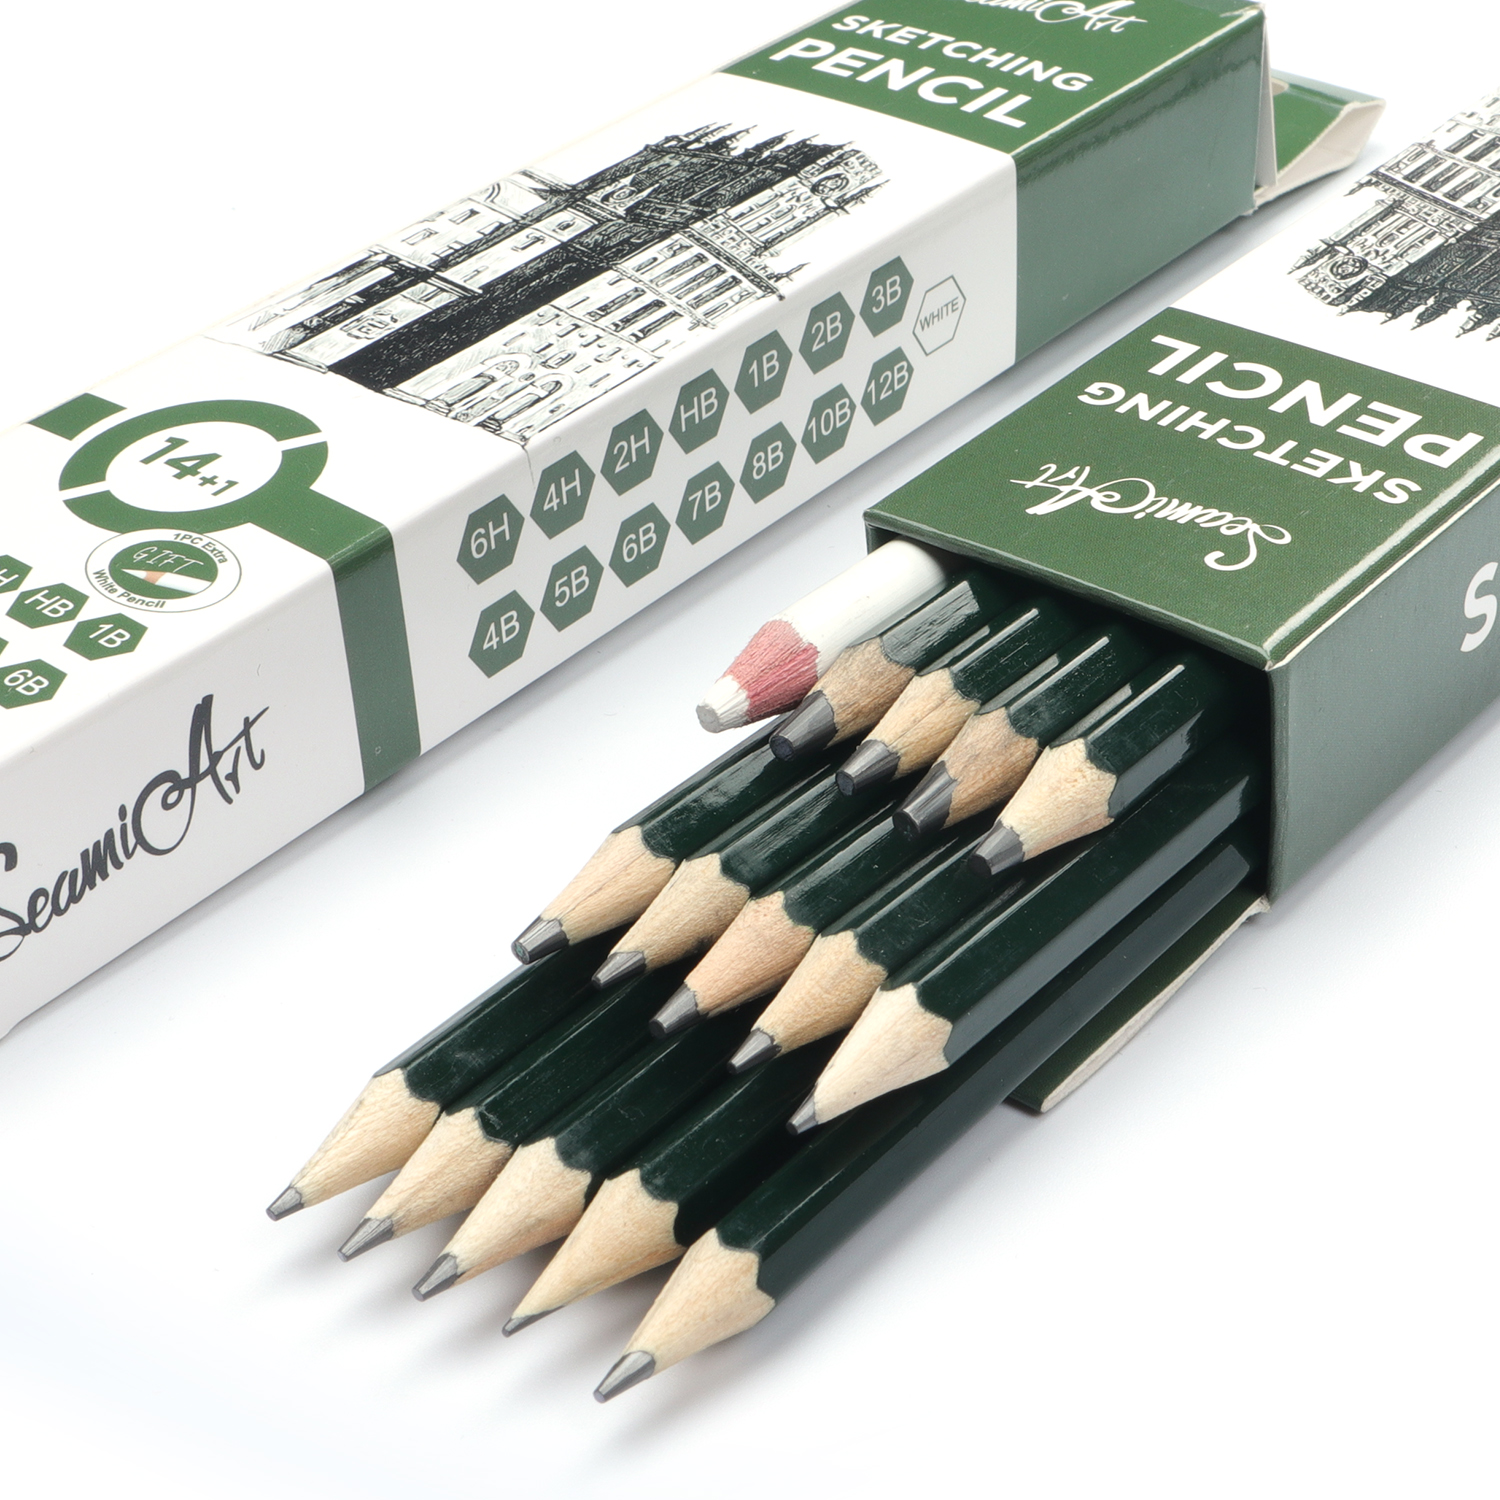 seamiart 14pcs/set 6H-12B Standard art drawing sketching hb wooden pencils set with 1pc White Charcoal Pencil office school1